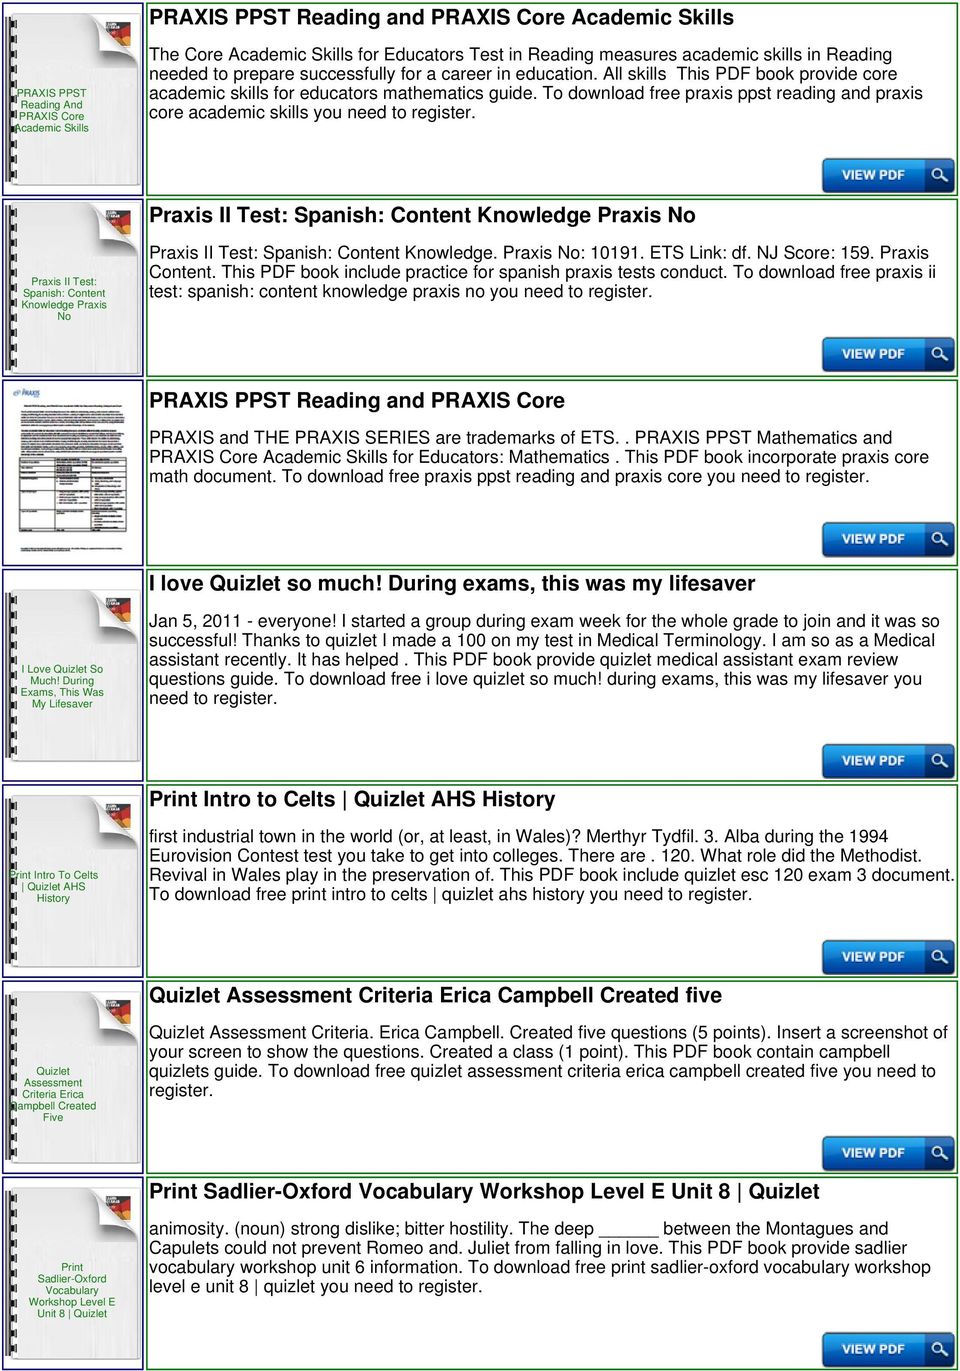 To download free praxis ppst reading and praxis core academic skills you Praxis II Test: Spanish: Content Knowledge Praxis No Praxis II Test: Spanish: Content Knowledge Praxis No Praxis II Test: